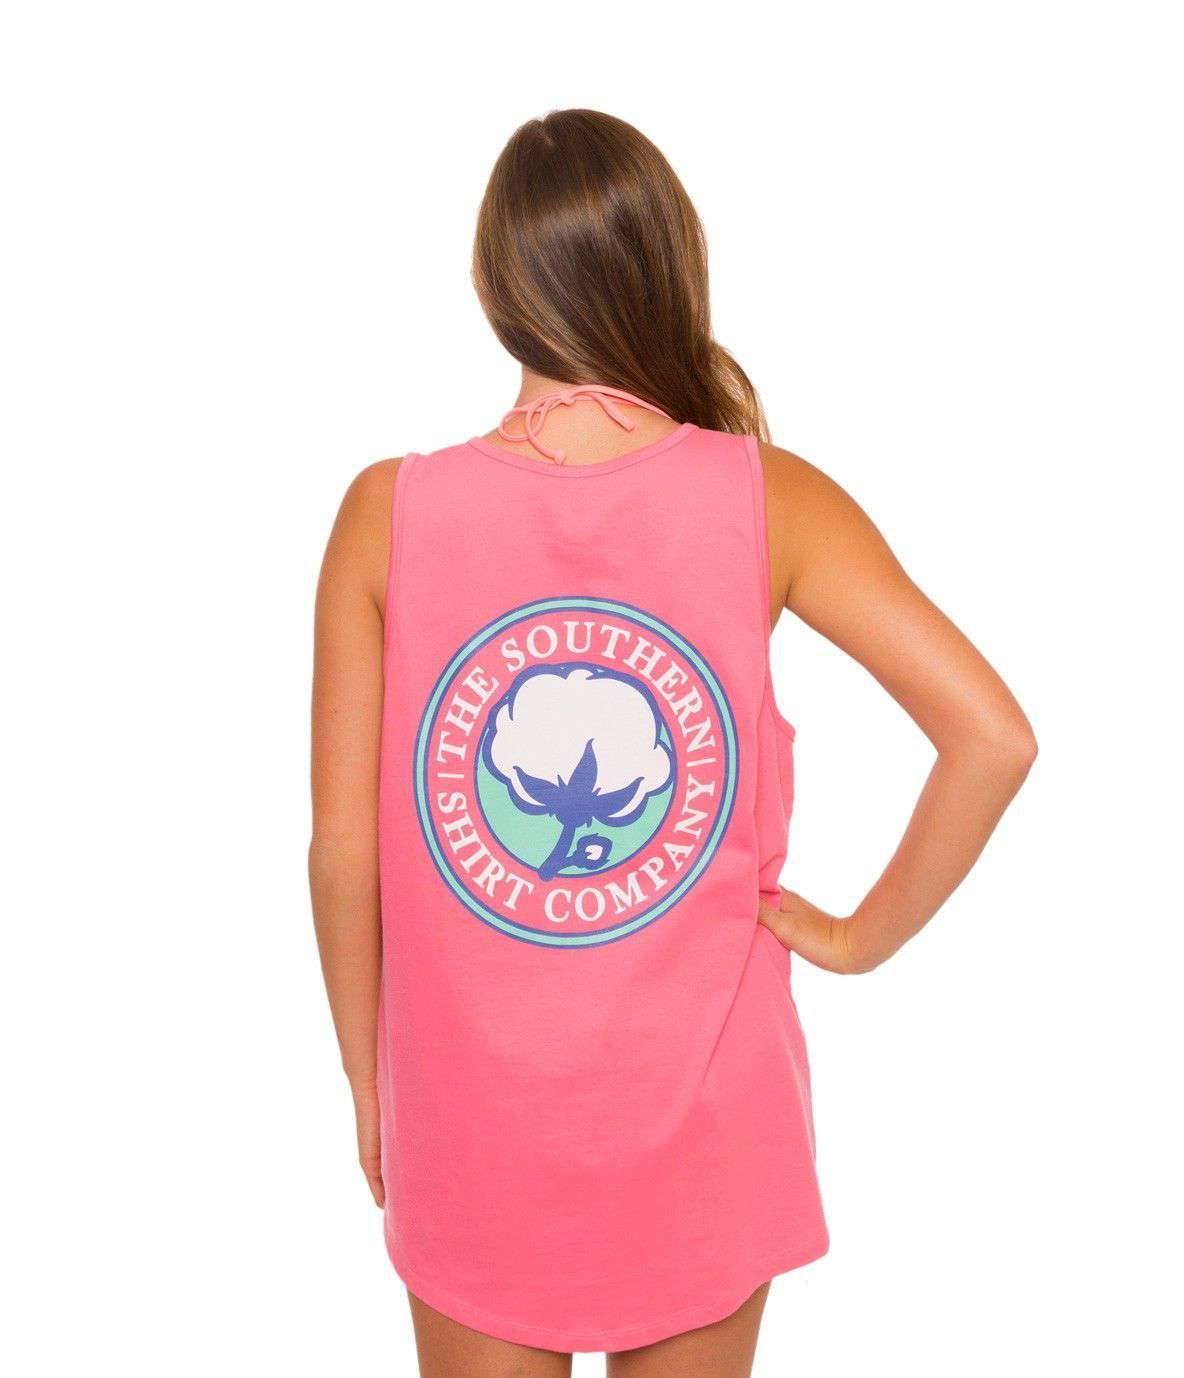 Jenny Tank in Pink Lemonade by The Southern Shirt Co. - Country Club Prep